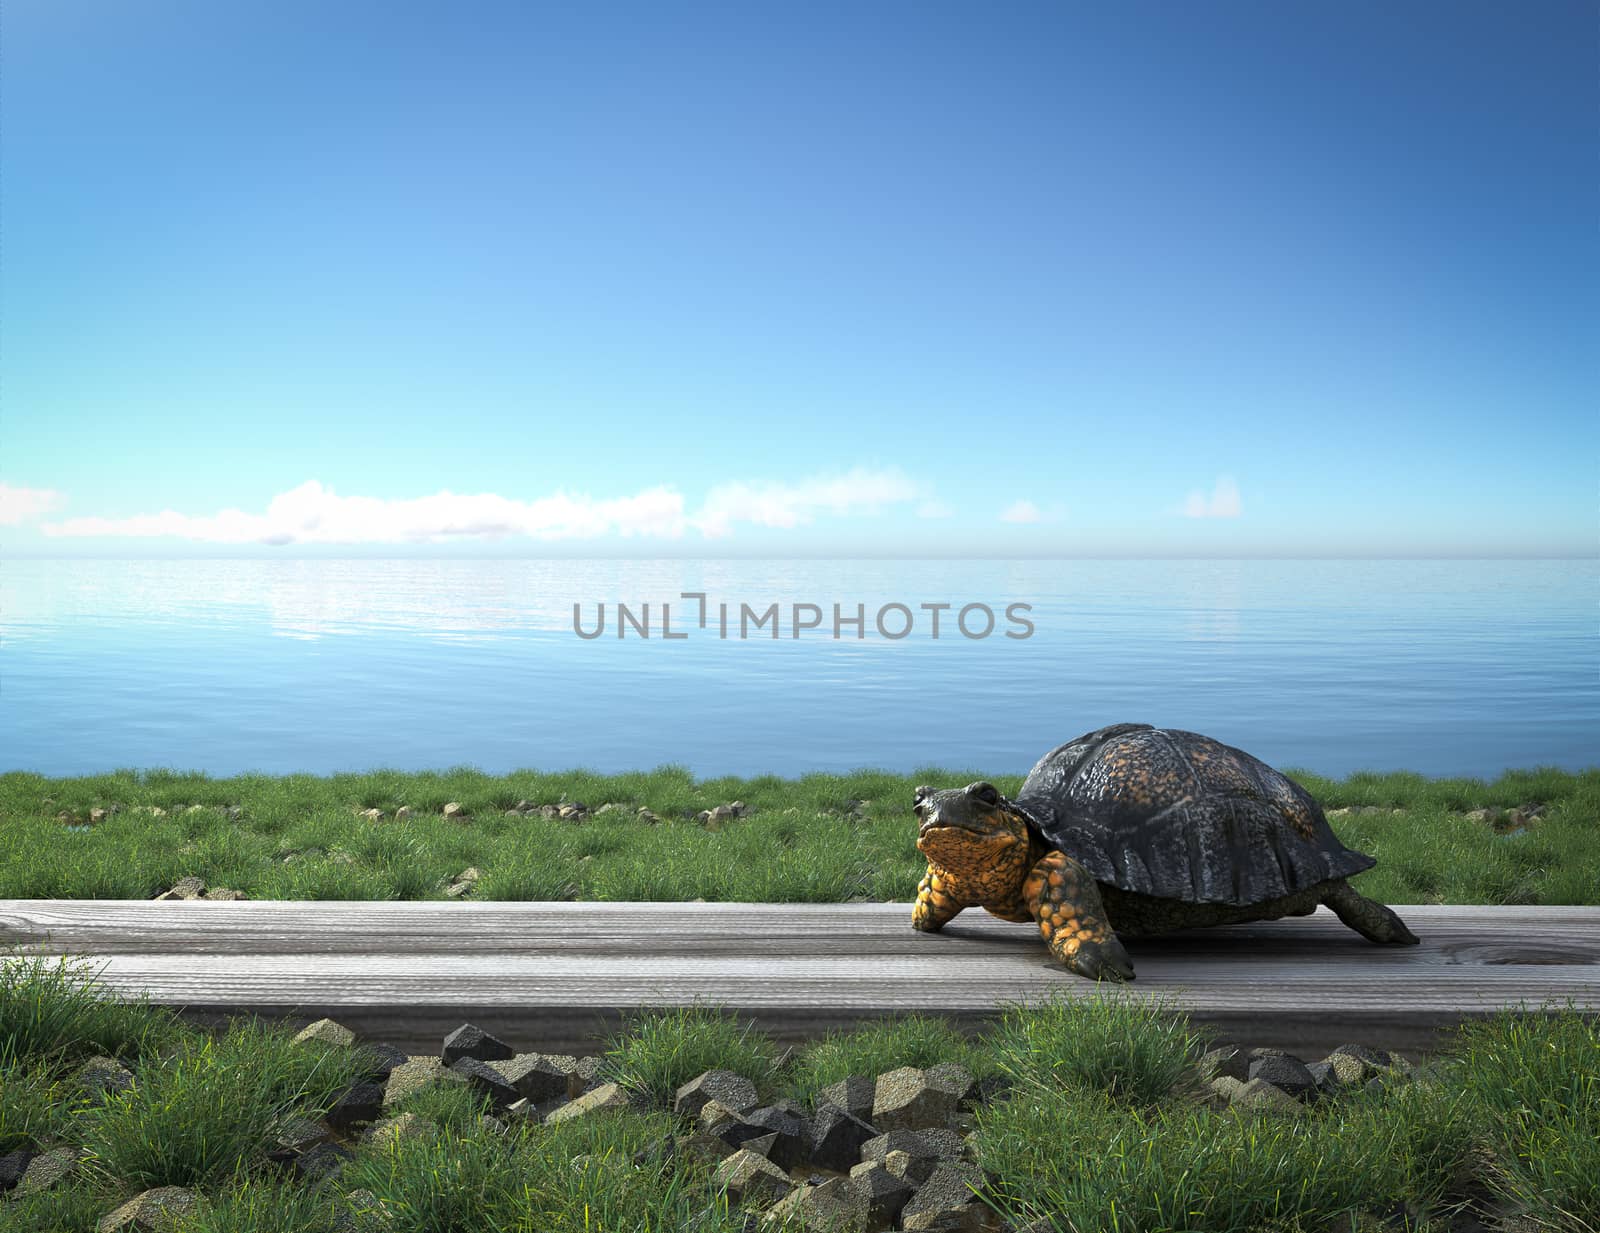 Small green turtle on the beach. Tourism concept background by denisgo